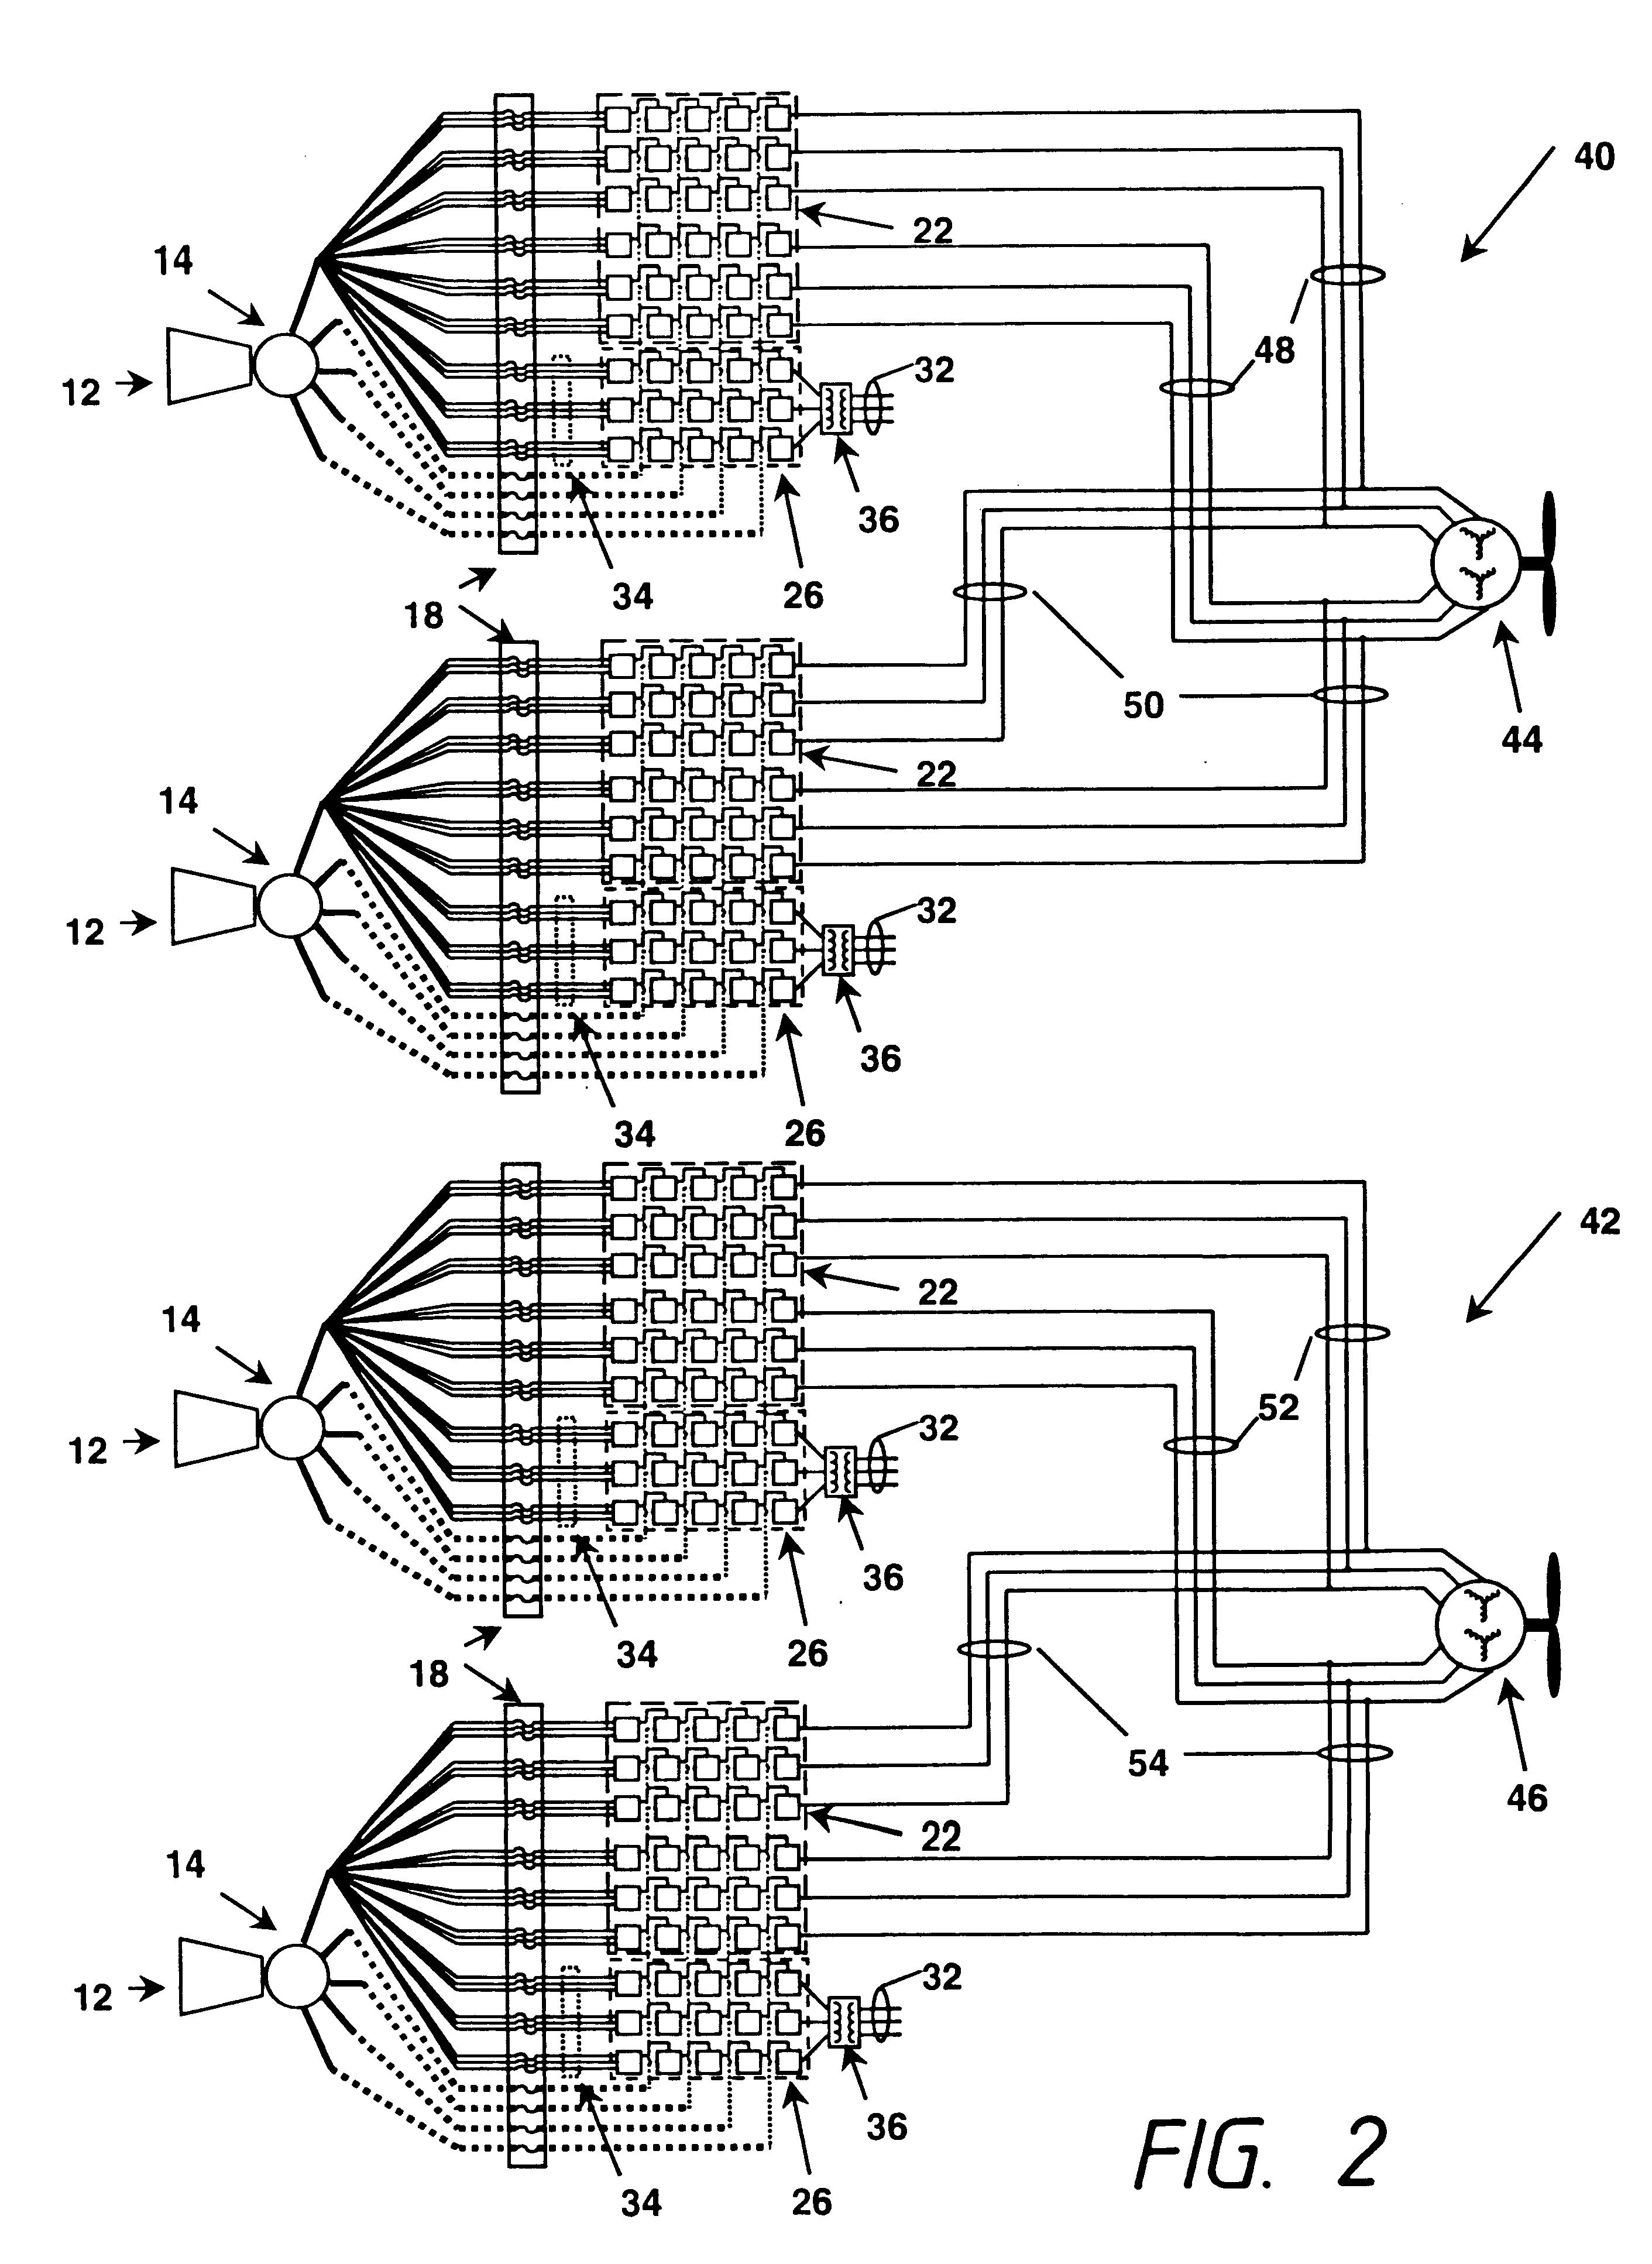 Integrated high frequency marine power distribution arrangement with transformerless high voltage variable speed drive